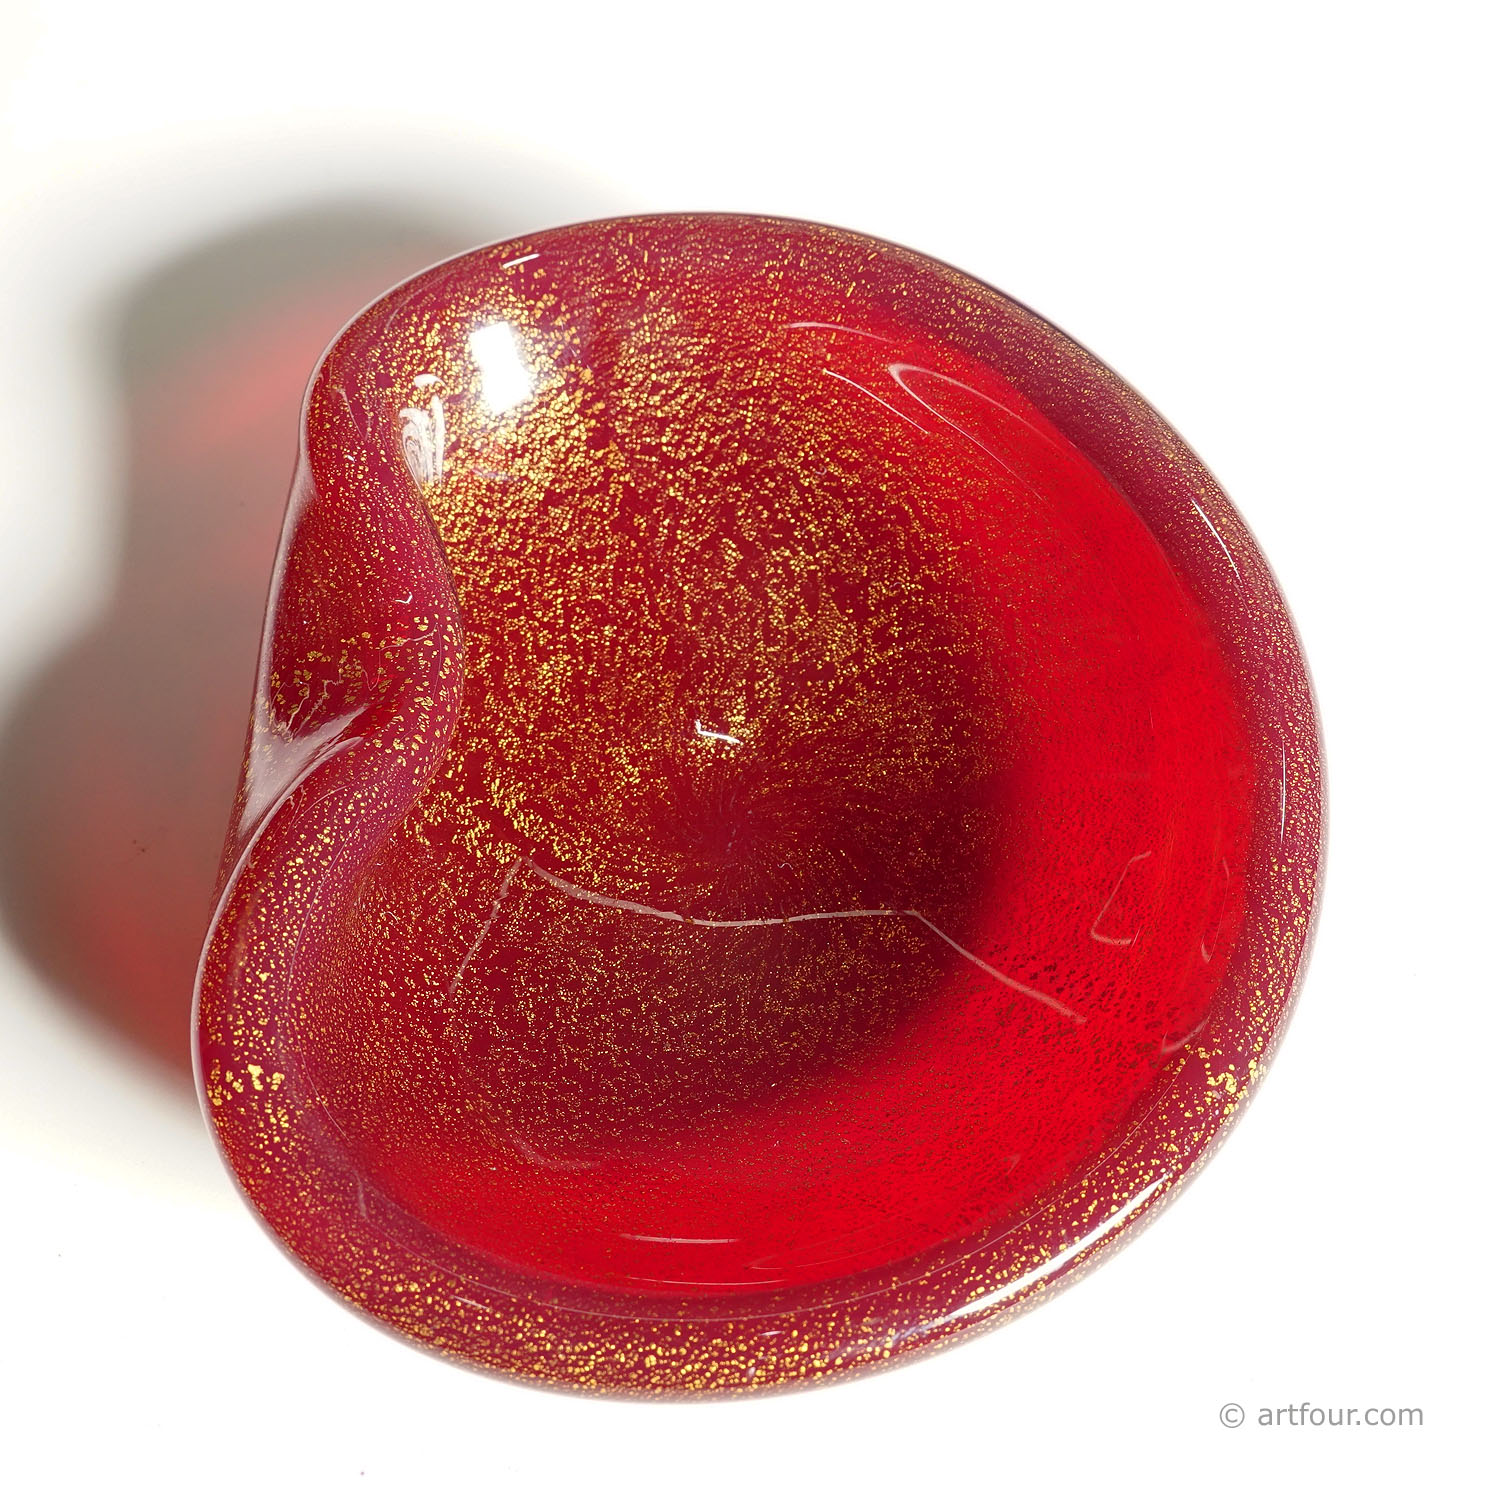 Murano Art Glass Bowl in Red with Gold, Seguso ca. 1960s